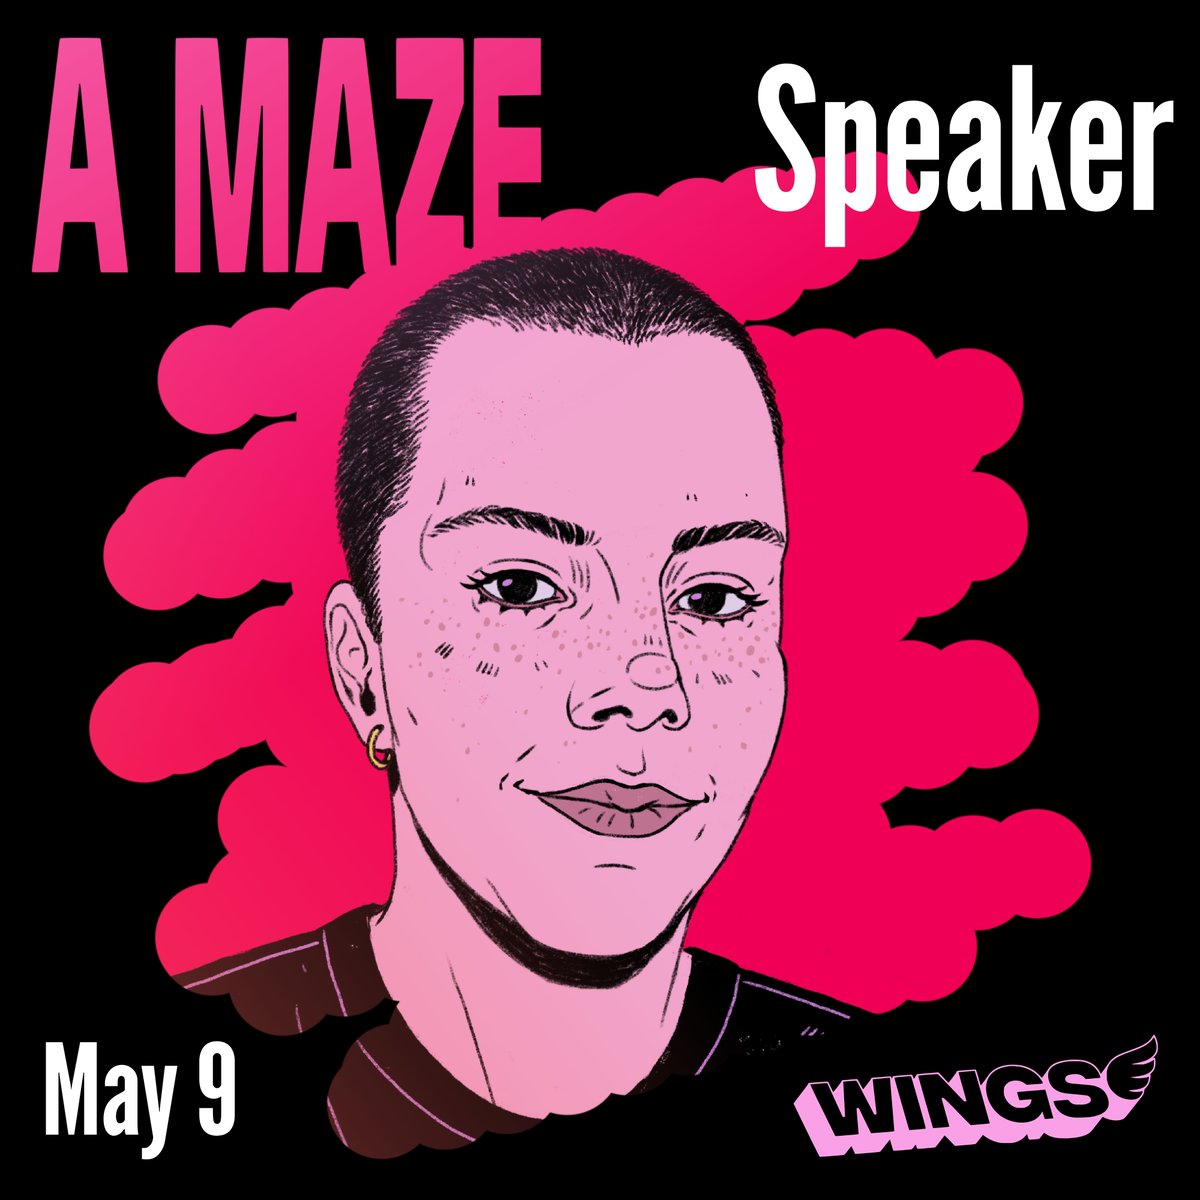 Astrid from WINGS is at @AMazeFest! 💜 If you see her, be sure to say hi! 👋 Astrid will be giving two talks on May 9 that you don't want to miss out on 🦩